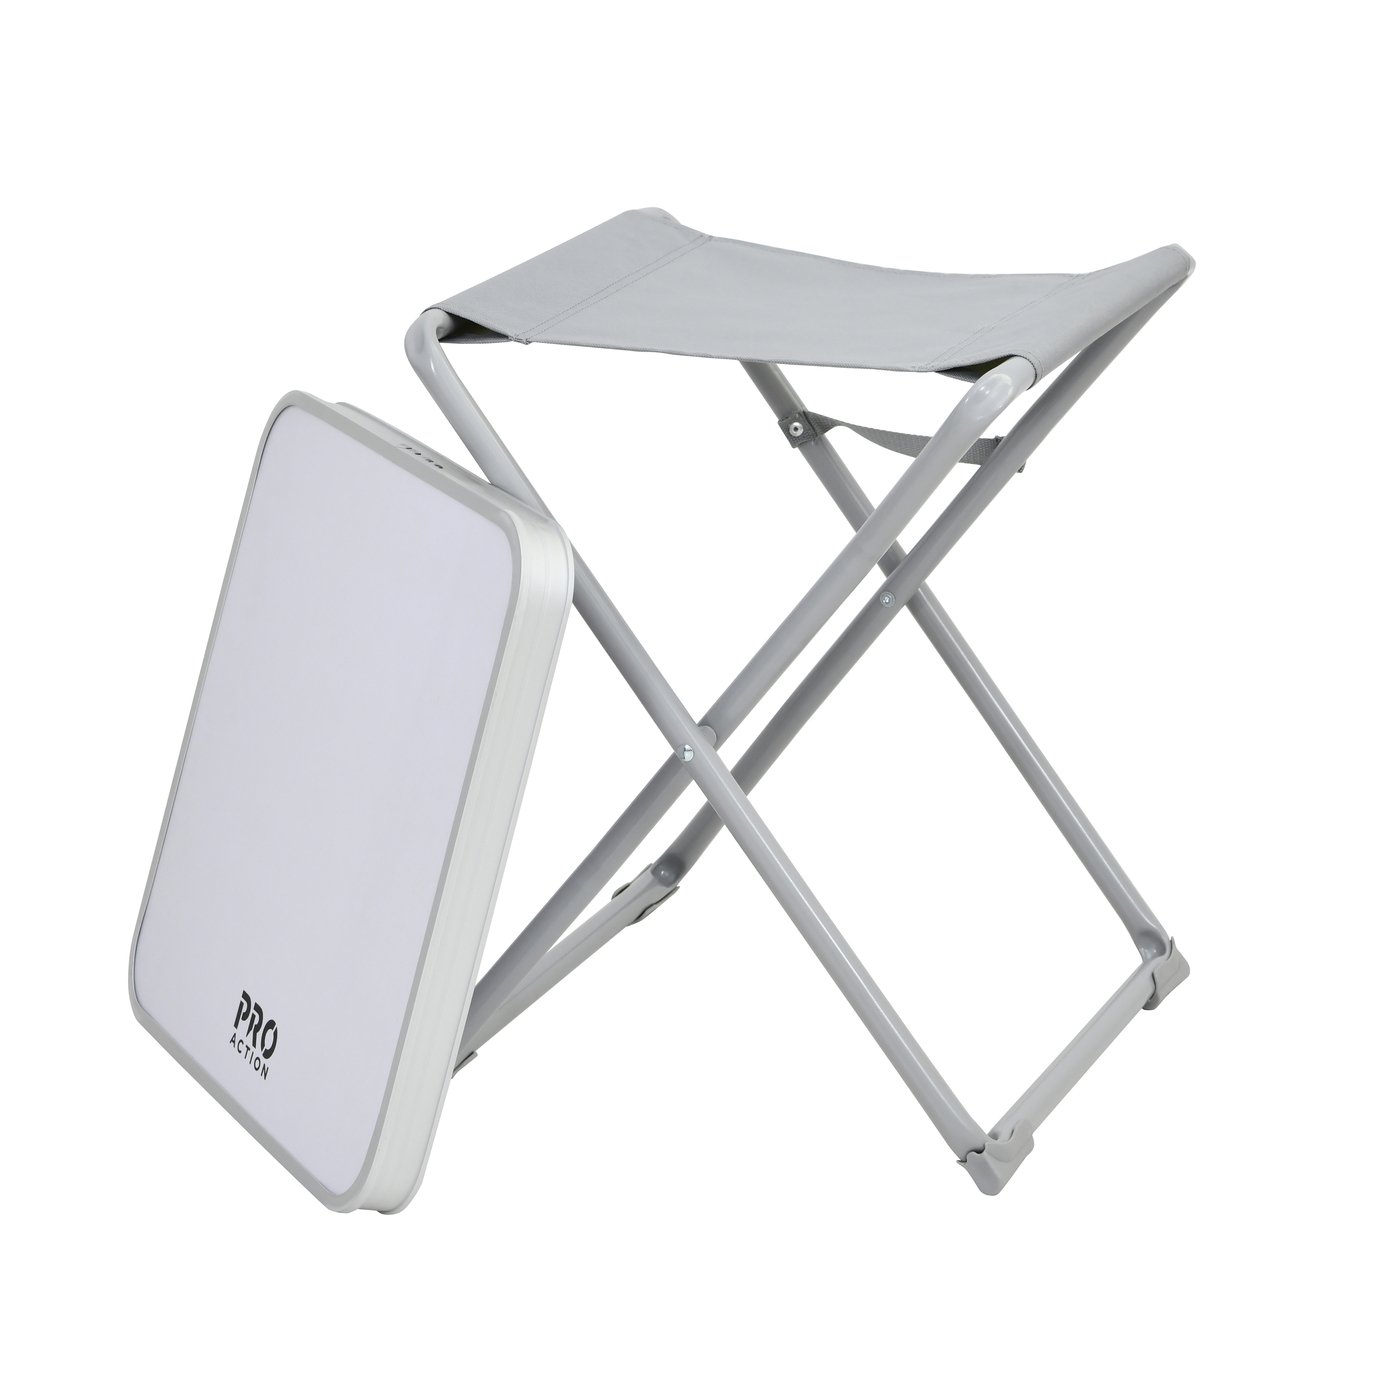 ProAction 2 in 1 Camping Stool and Table